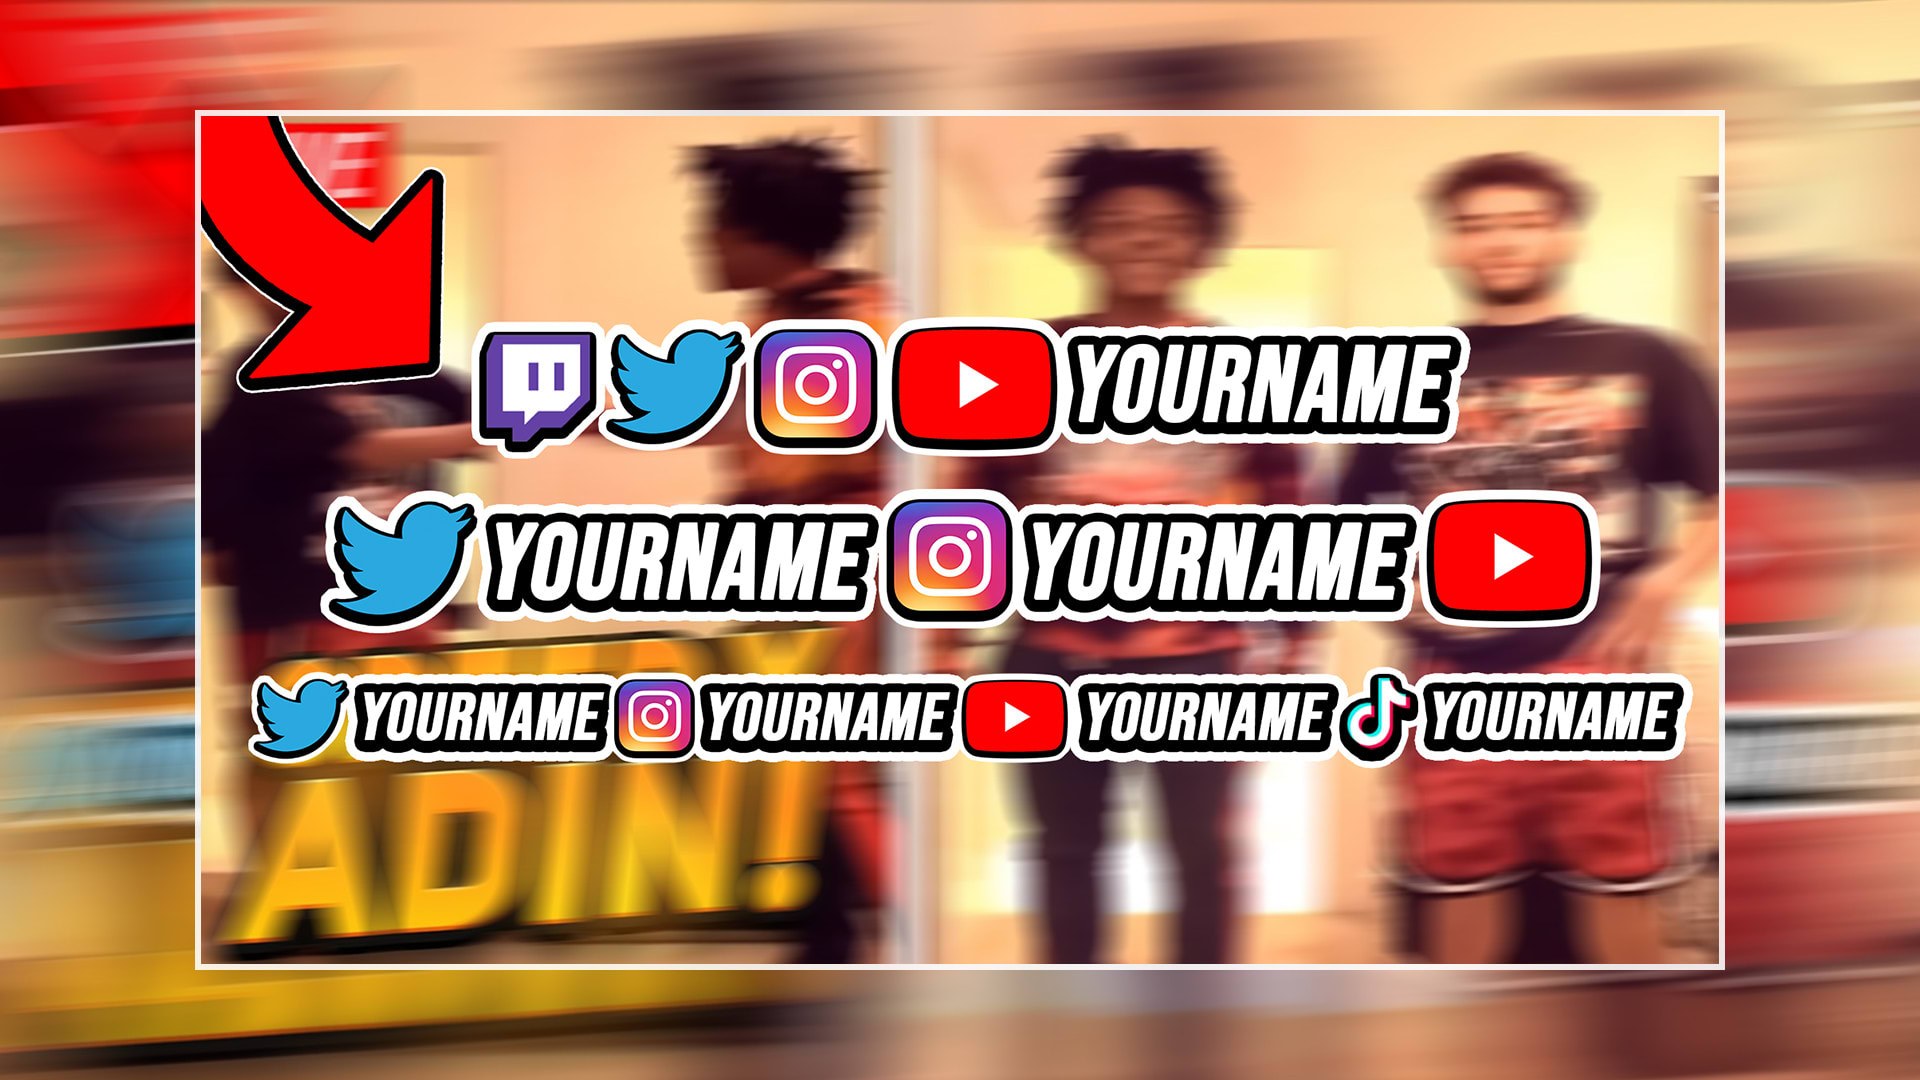 Create a social media overlay like adin ross and ishowspeed for twitch   by Gxniushd